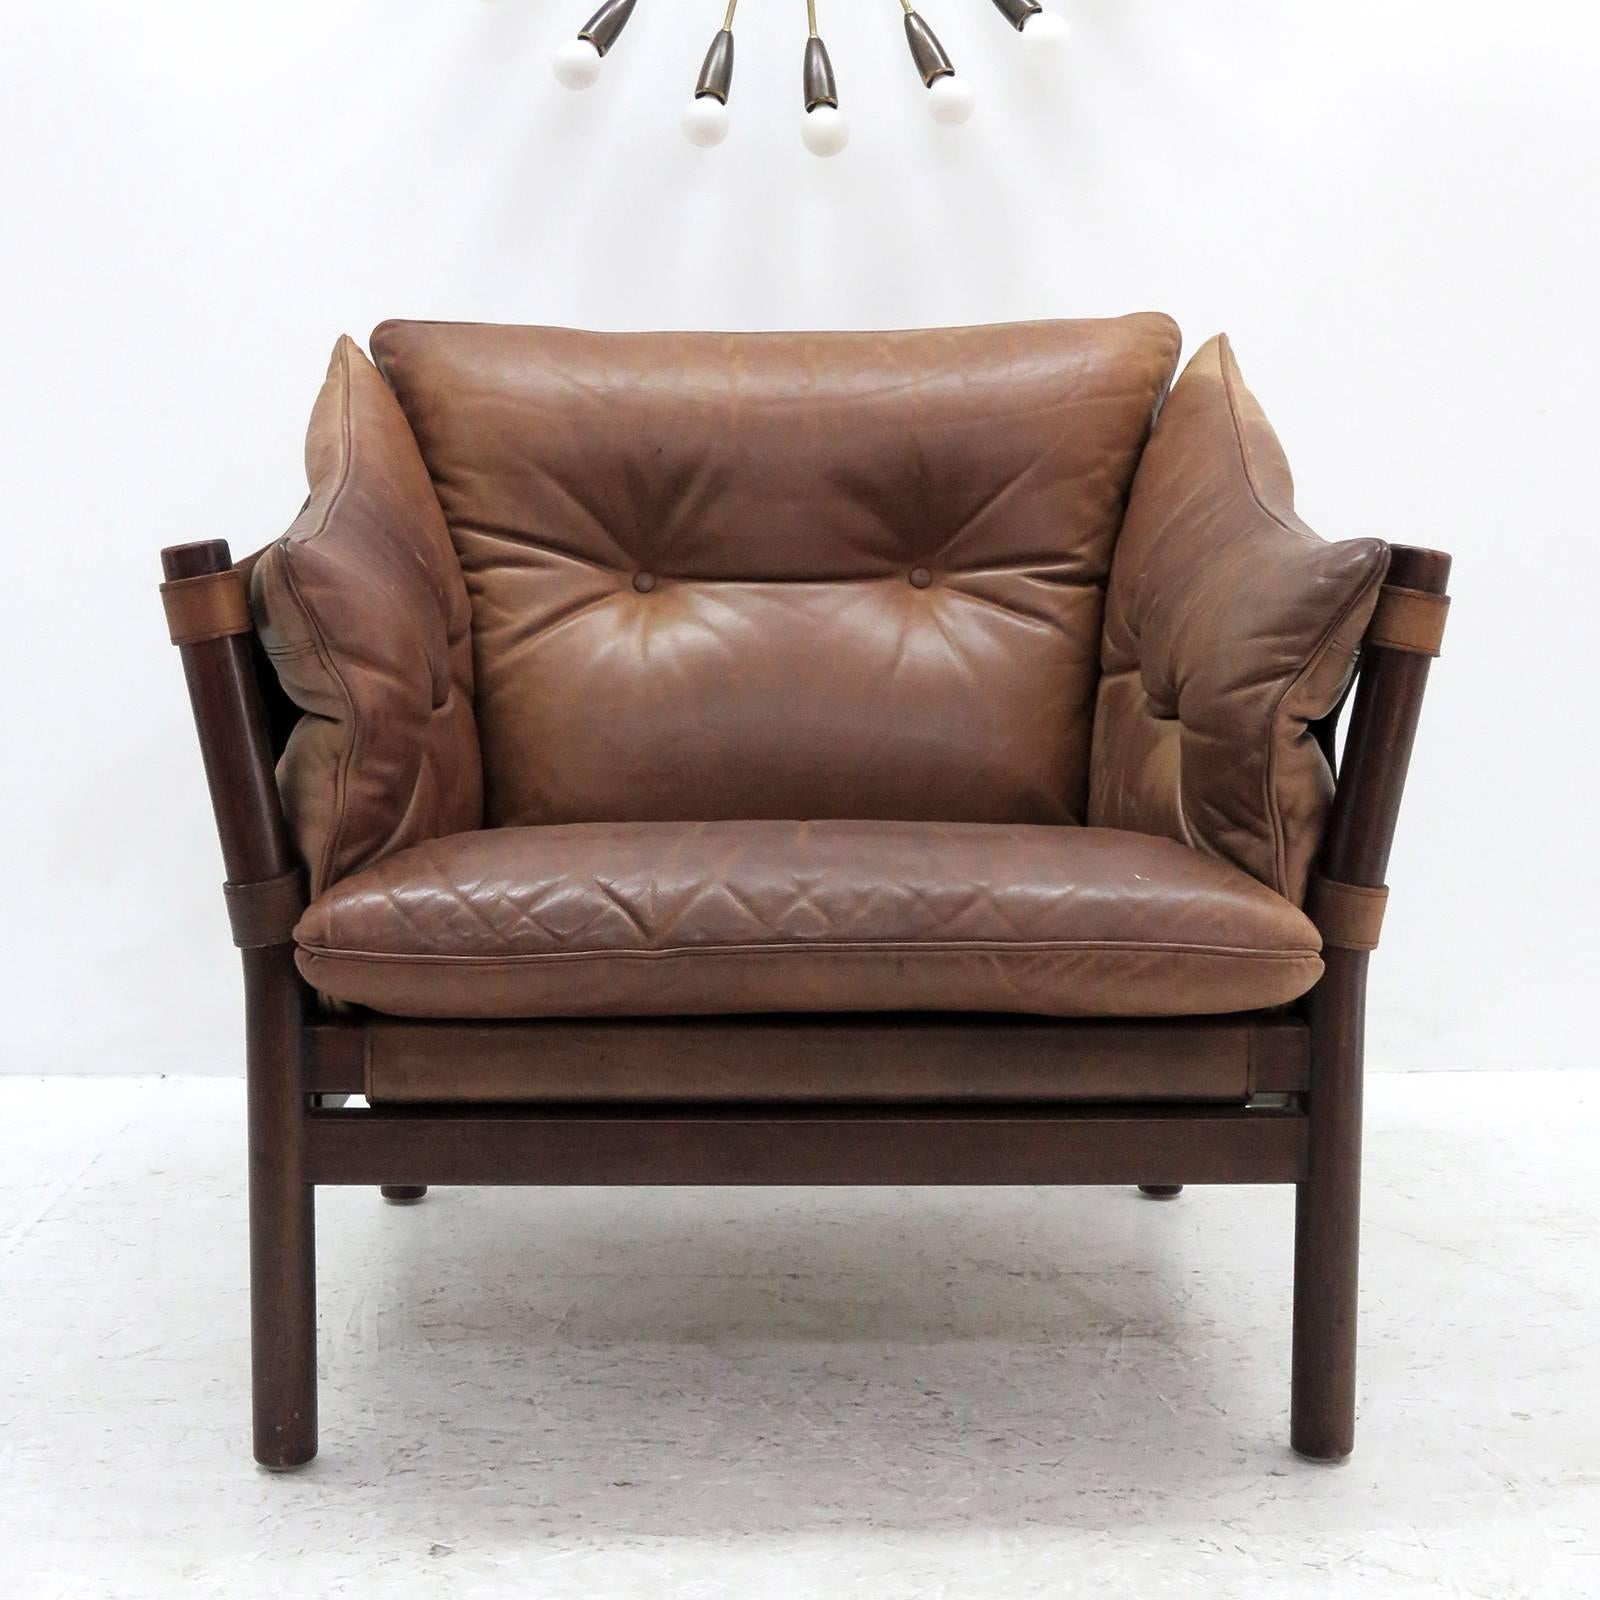 stunning pair of leather armchairs designed in the early 1960s designed and produced by Norell Möbel AB, Sweden, with thick tufted leather cushions on saddle leather sling supports with brass hardware, the frame is made of sturdy, dark stained solid